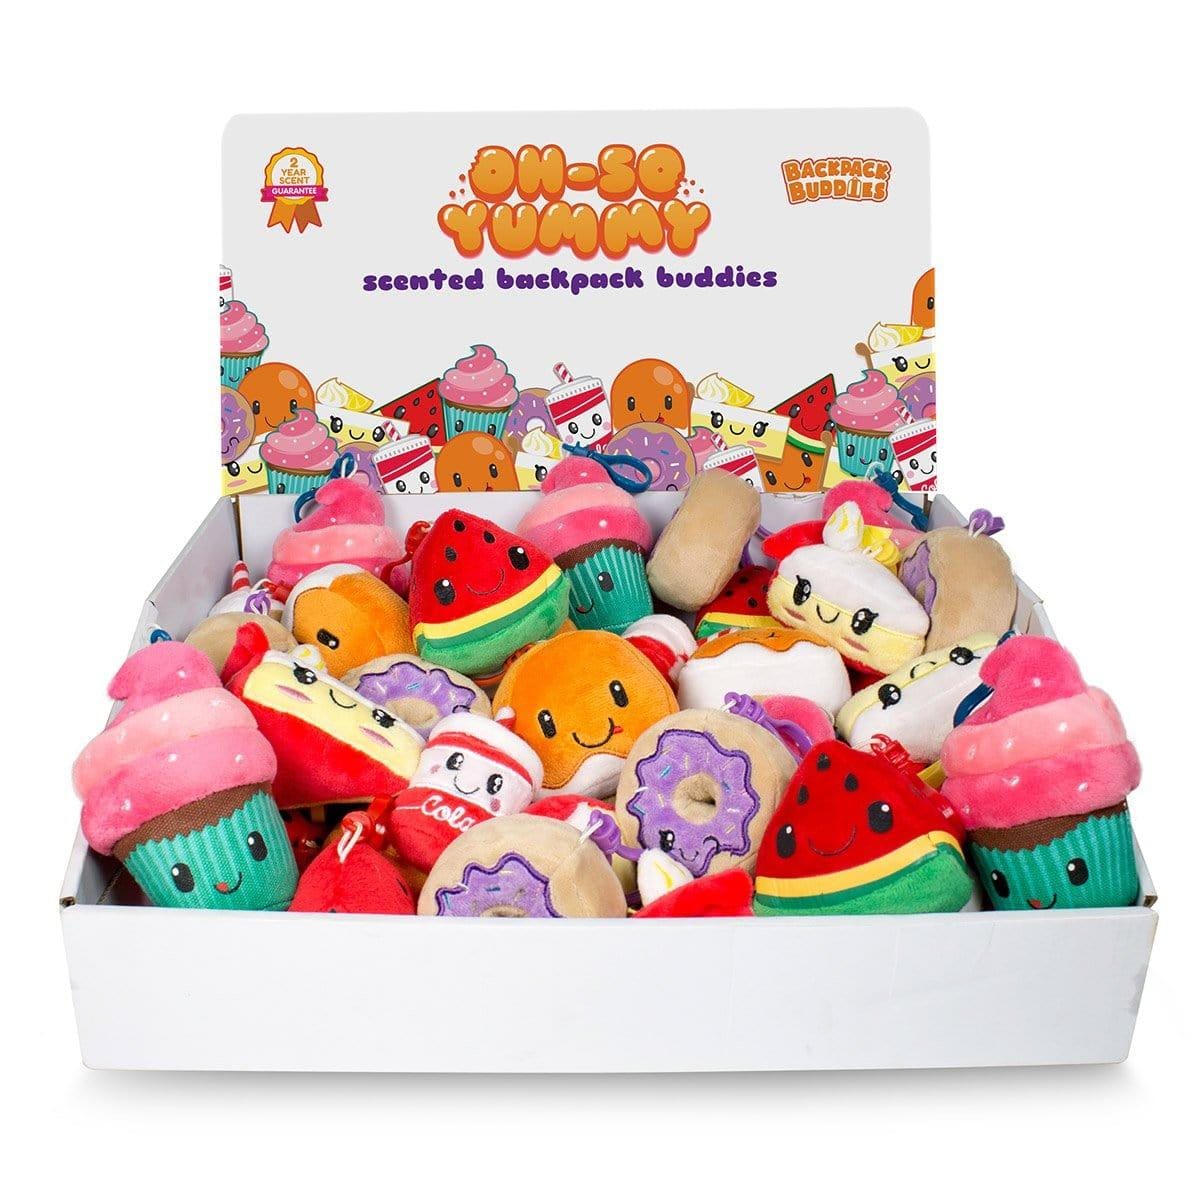 Buy Kids Birthday Food-themed backpack buddies  - Assortment sold at Party Expert